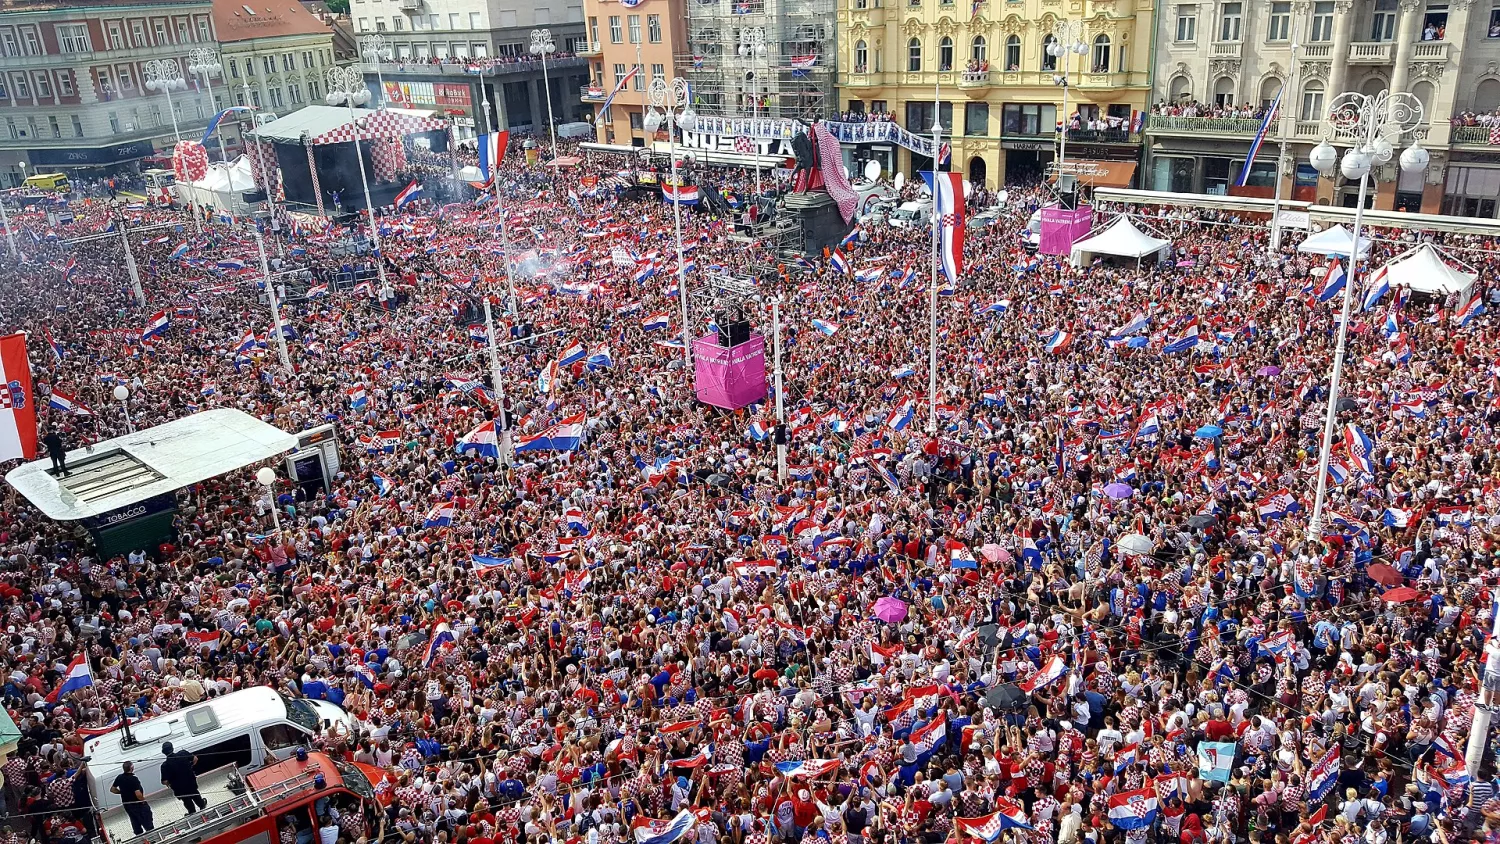 Fan celebrations during 2018 FIFA World Cup on the main square of Zagreb, Croatia